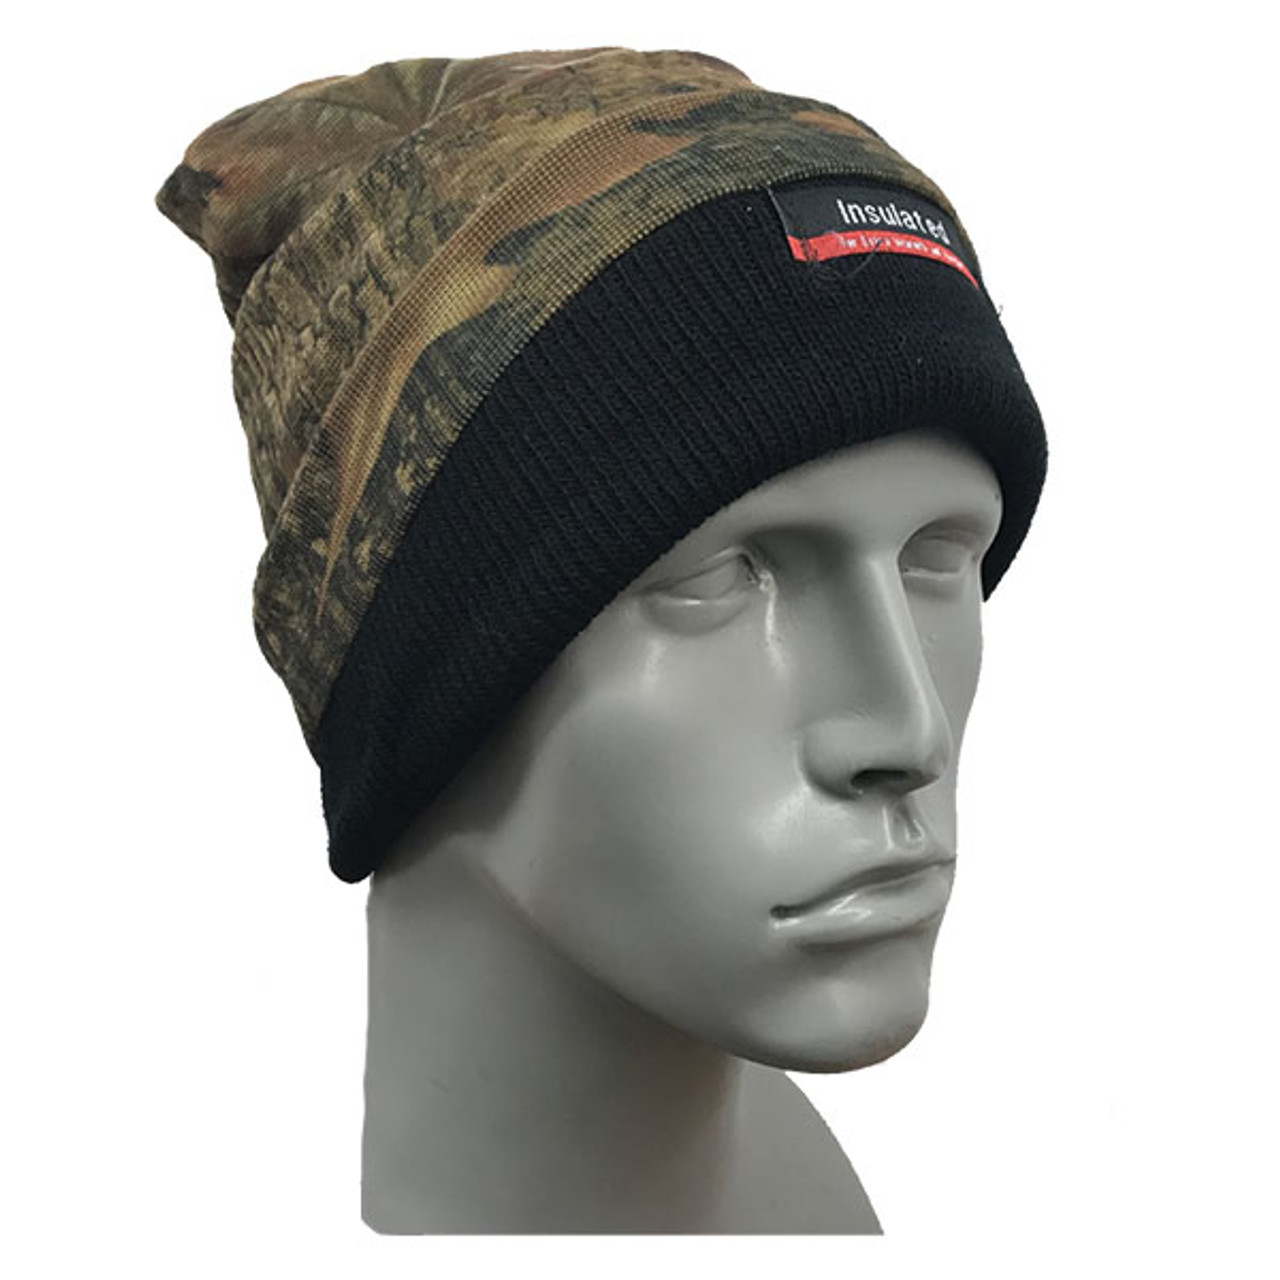 Insulated Reversible Camo / Orange Knit Hat – camo side